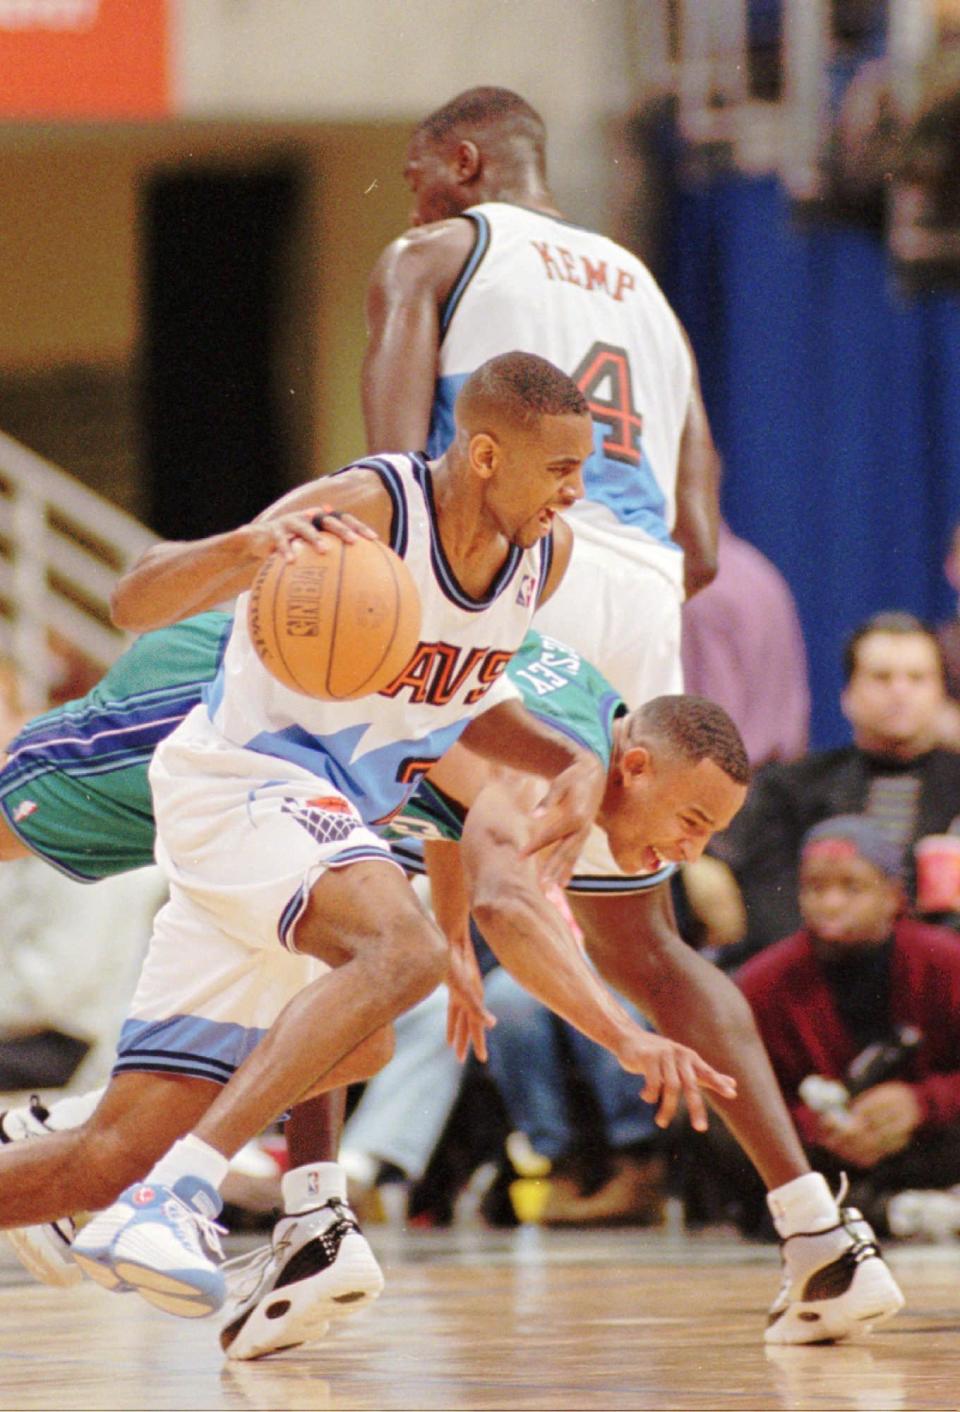 Cleveland Cavliers guard Derek Anderson (23) drives the ball toward the basket as Charlotte Hornets guard David Wesley, center, gets trapped in the middle between Anderson and Cleveland's Shawn Kemp (4) in the second quarter Saturday, Dec. 13, 1997, at the Gund Arena in Cleveland.